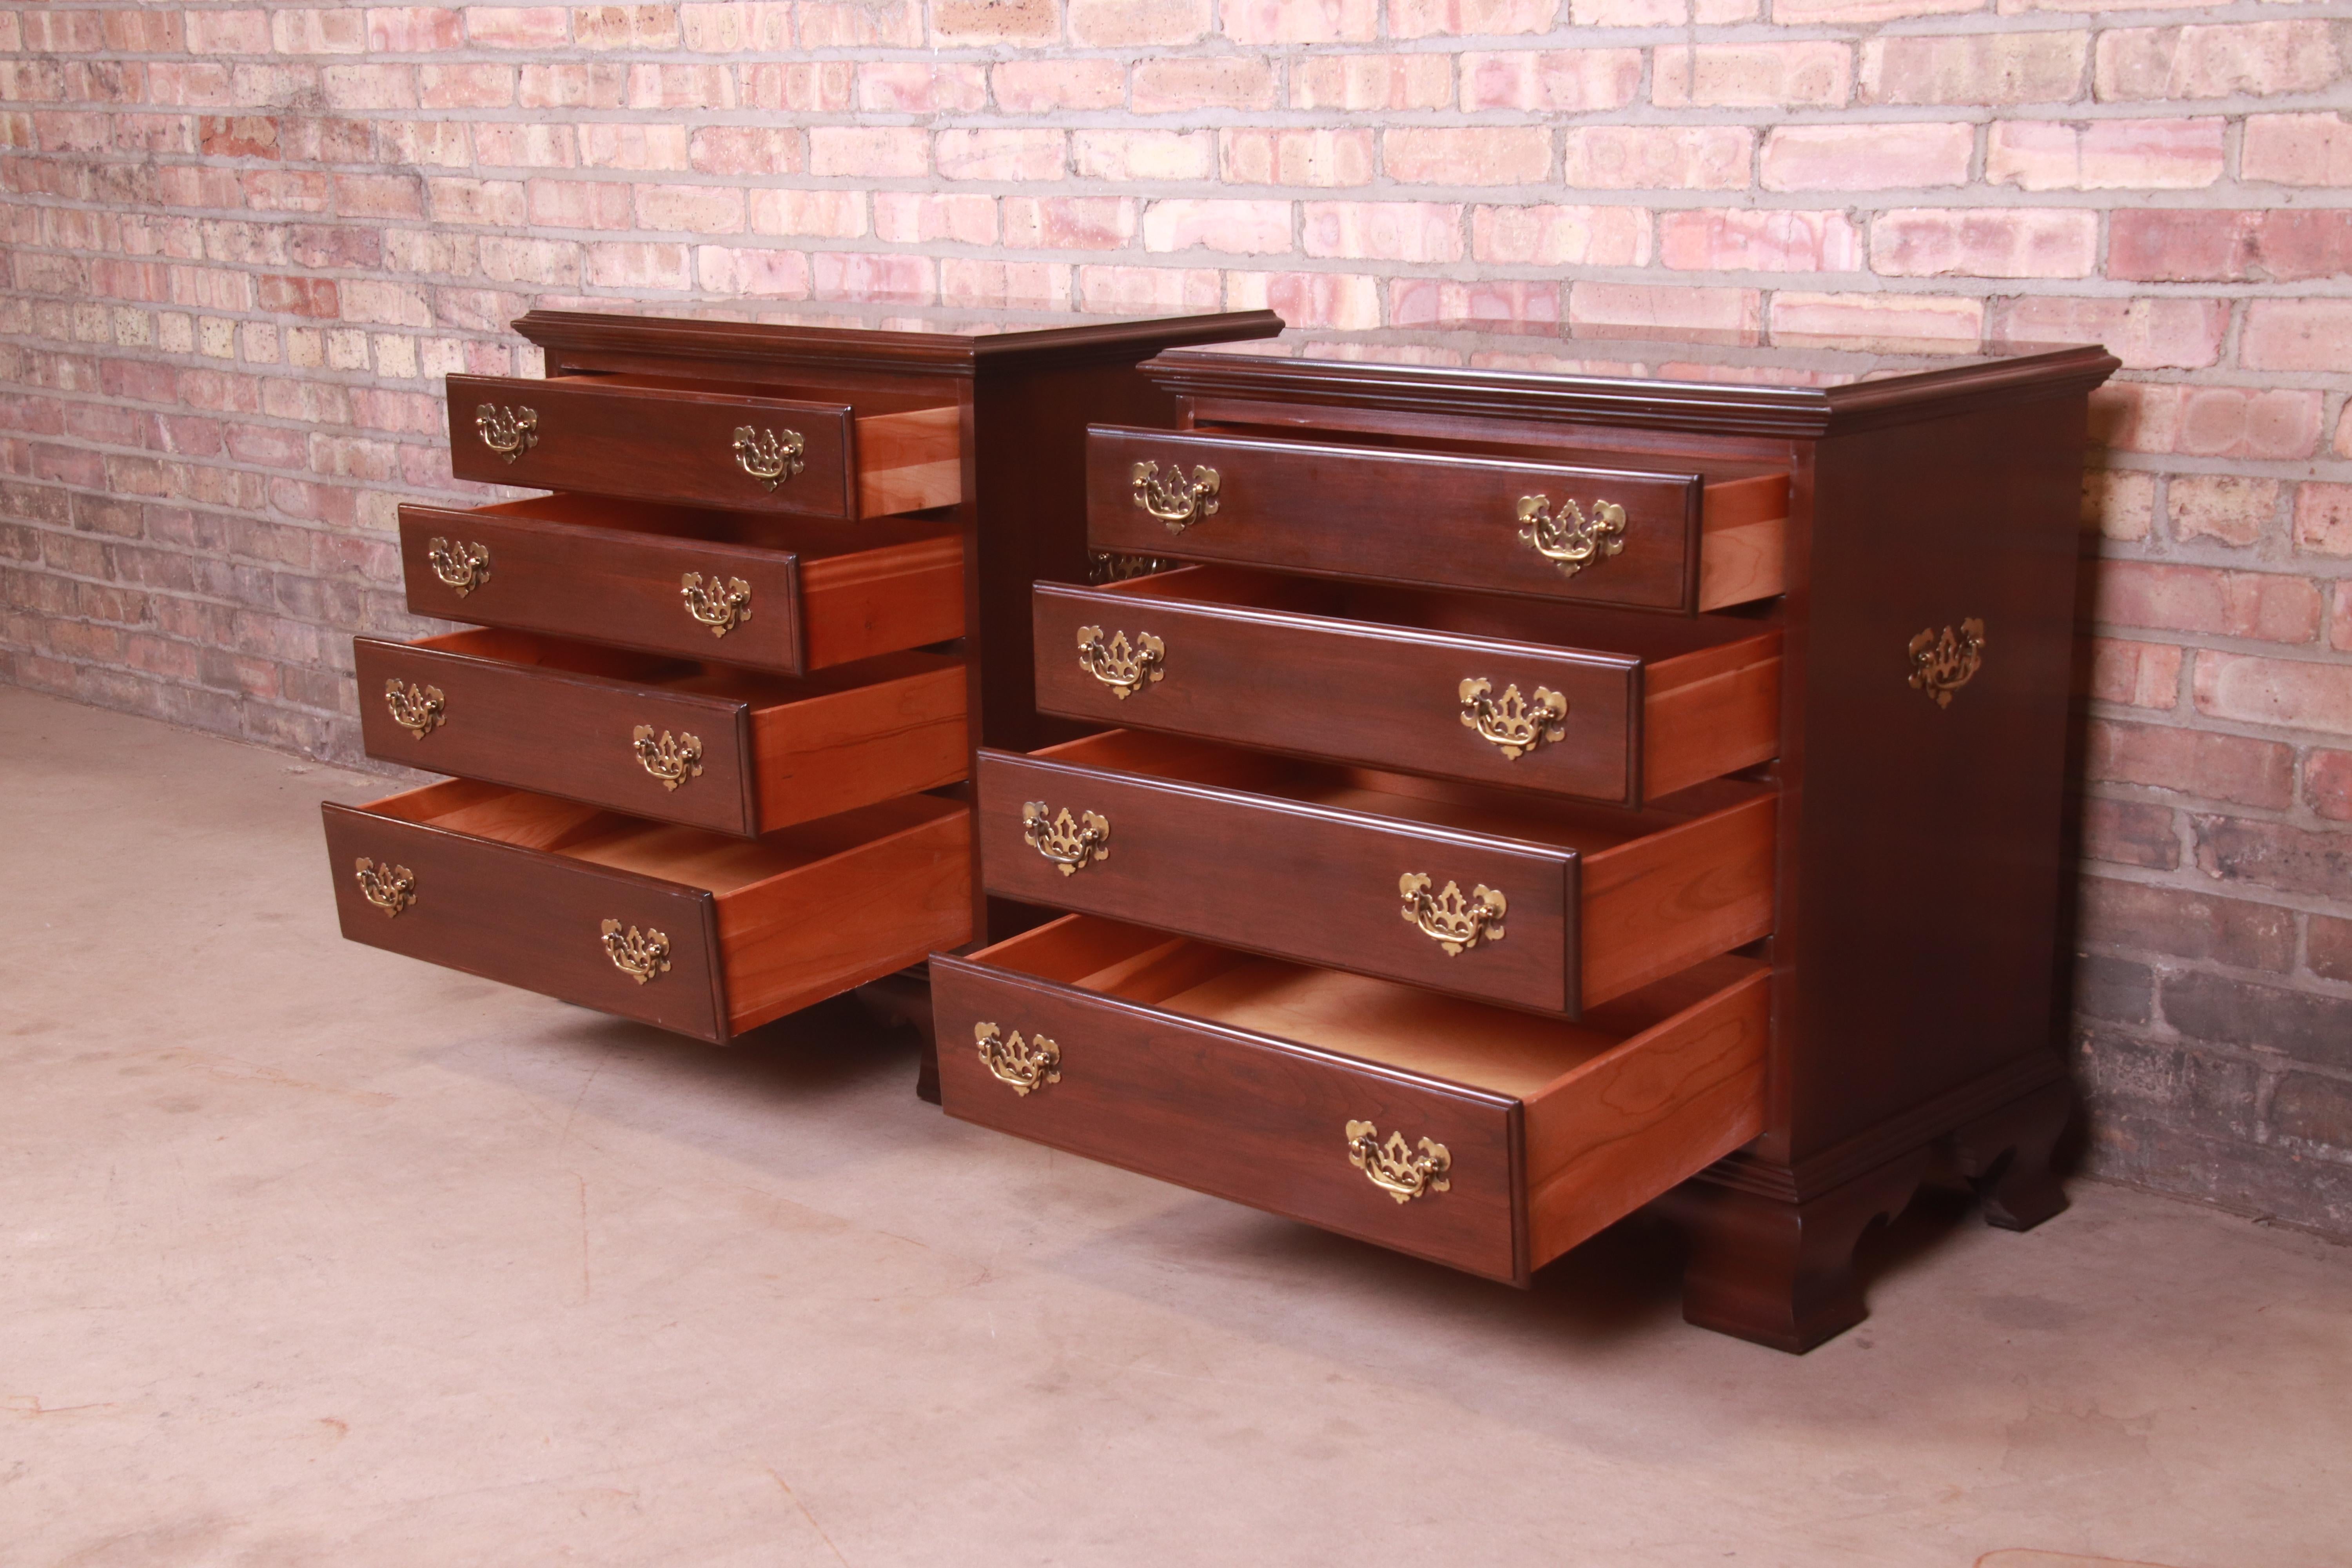 Ethan Allen Georgian Mahogany Four-Drawer Bedside Chests, Pair 5